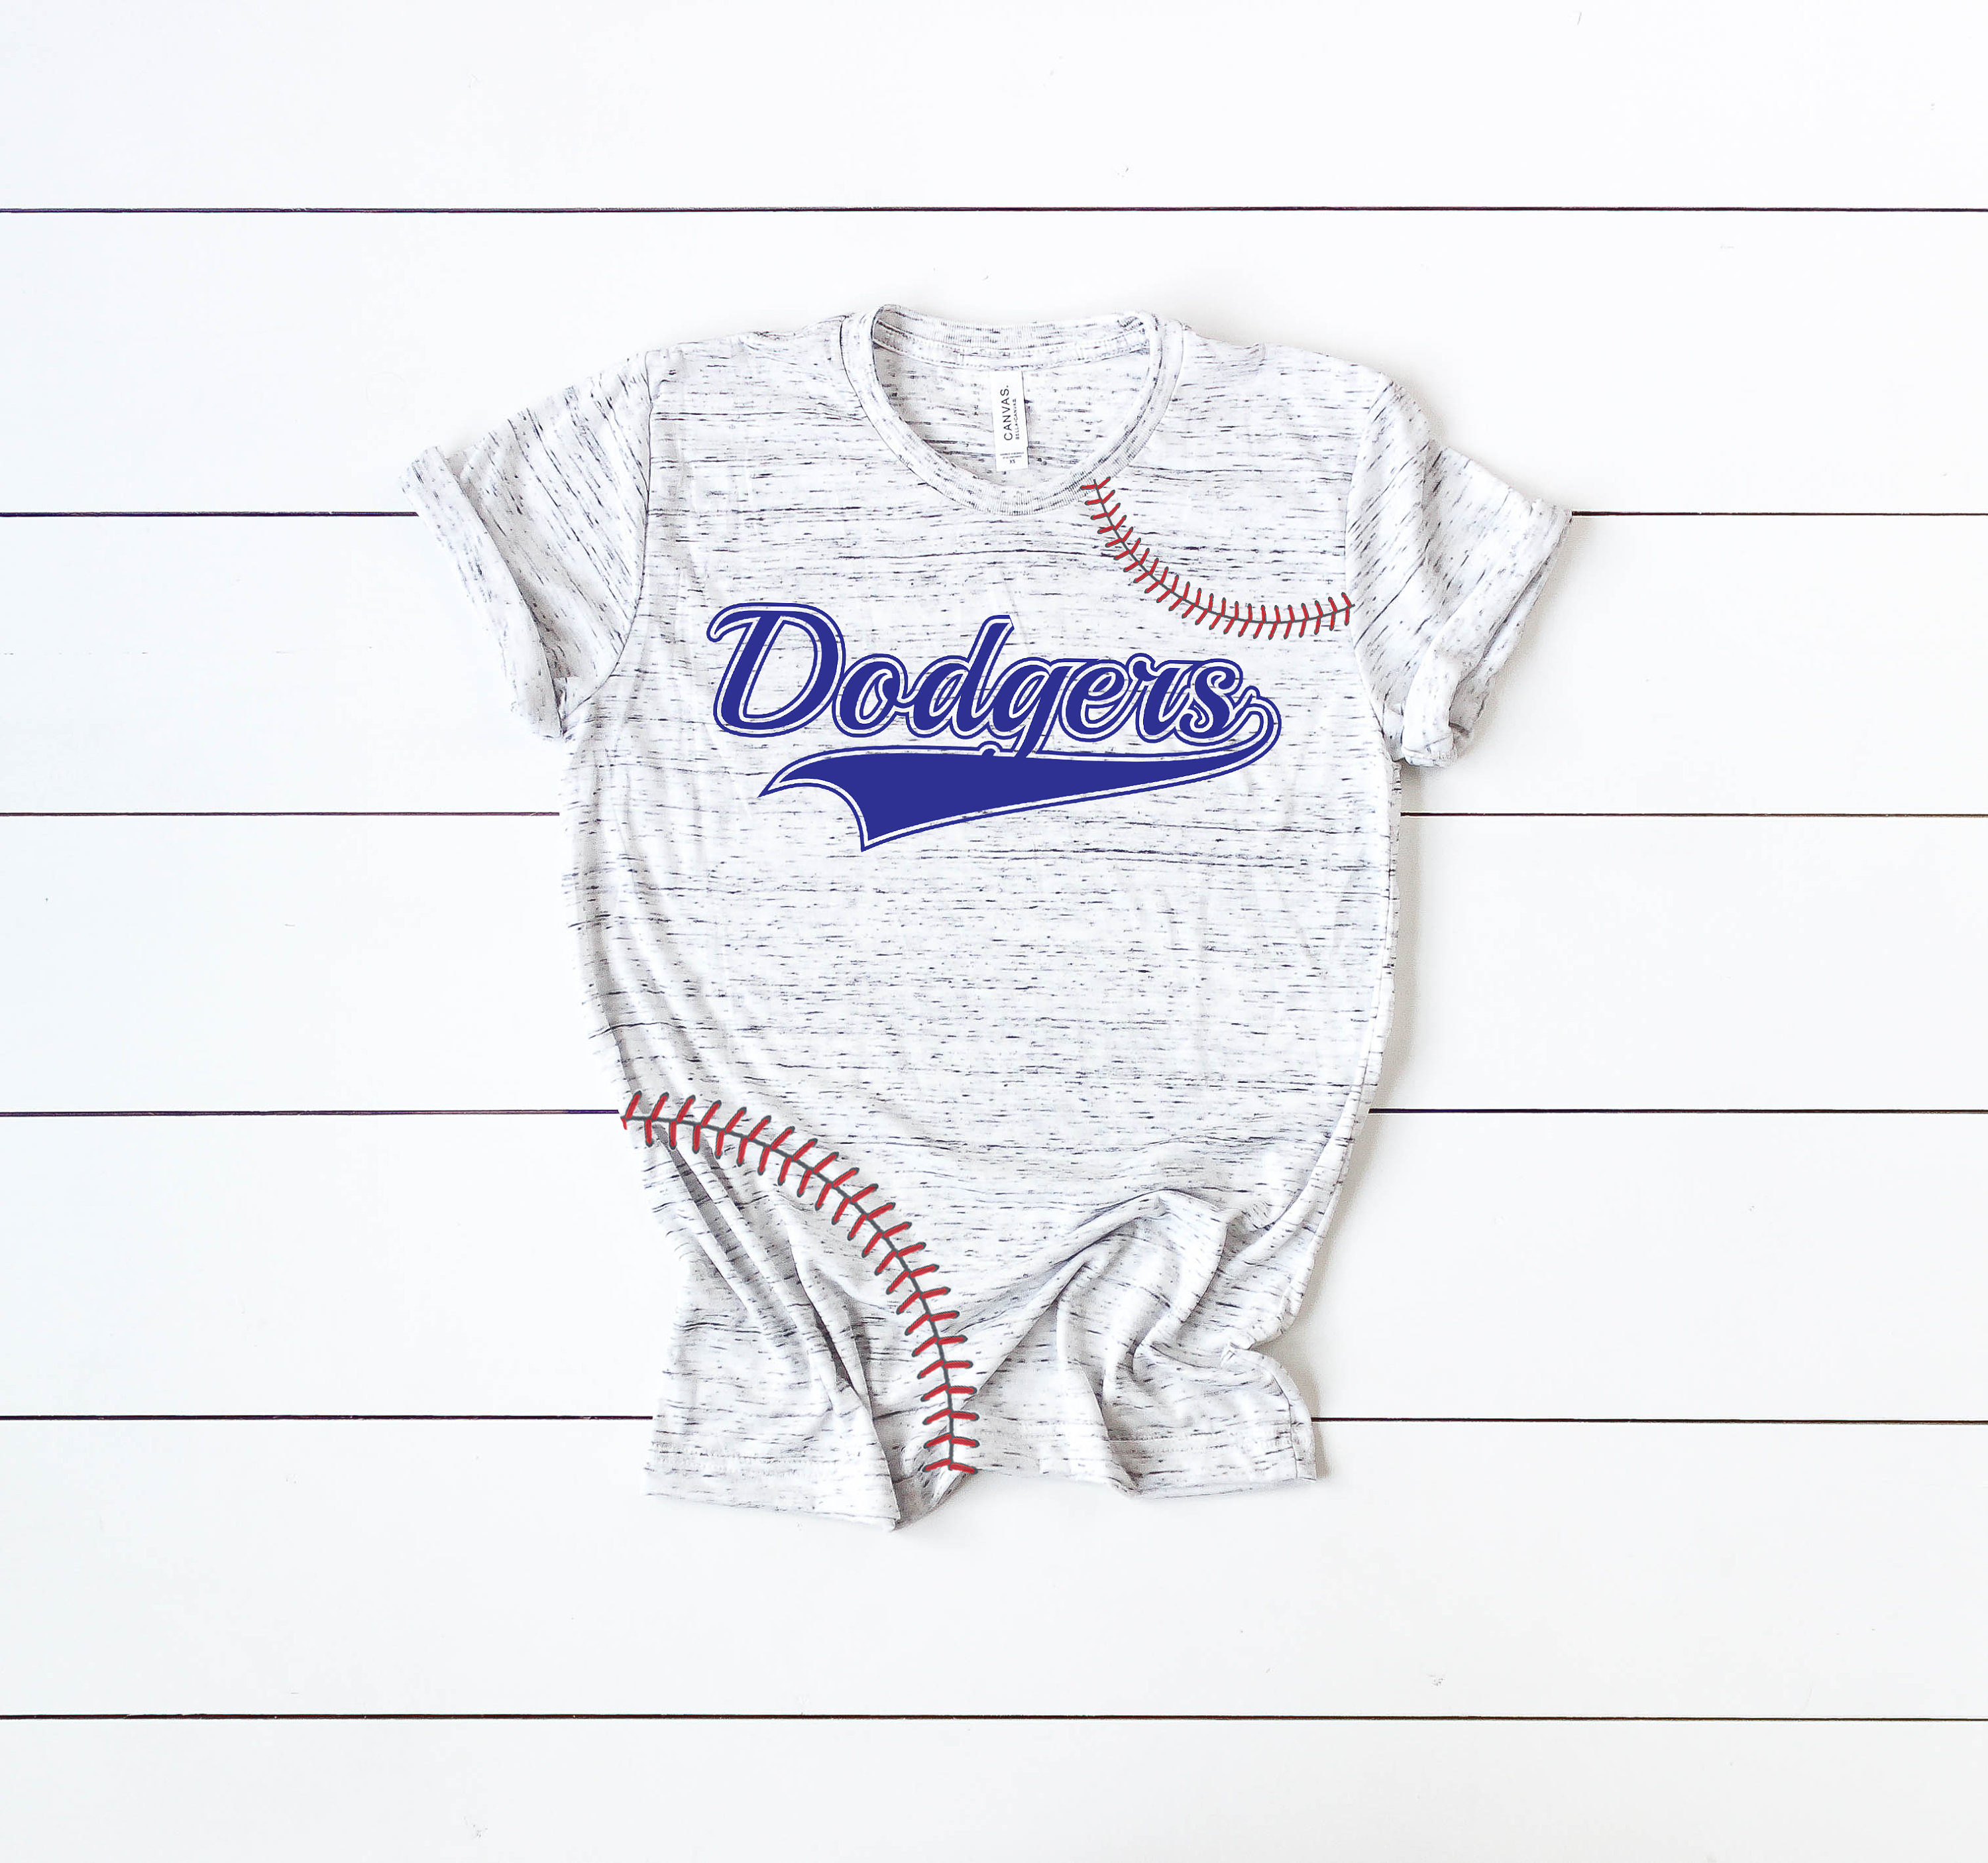 JCoApparel Personalize Your Team Name | Personalized Baseball Shirt | Customized Team Shirt | Dodgers Baseball Shirt | Baseball Seams Shirt